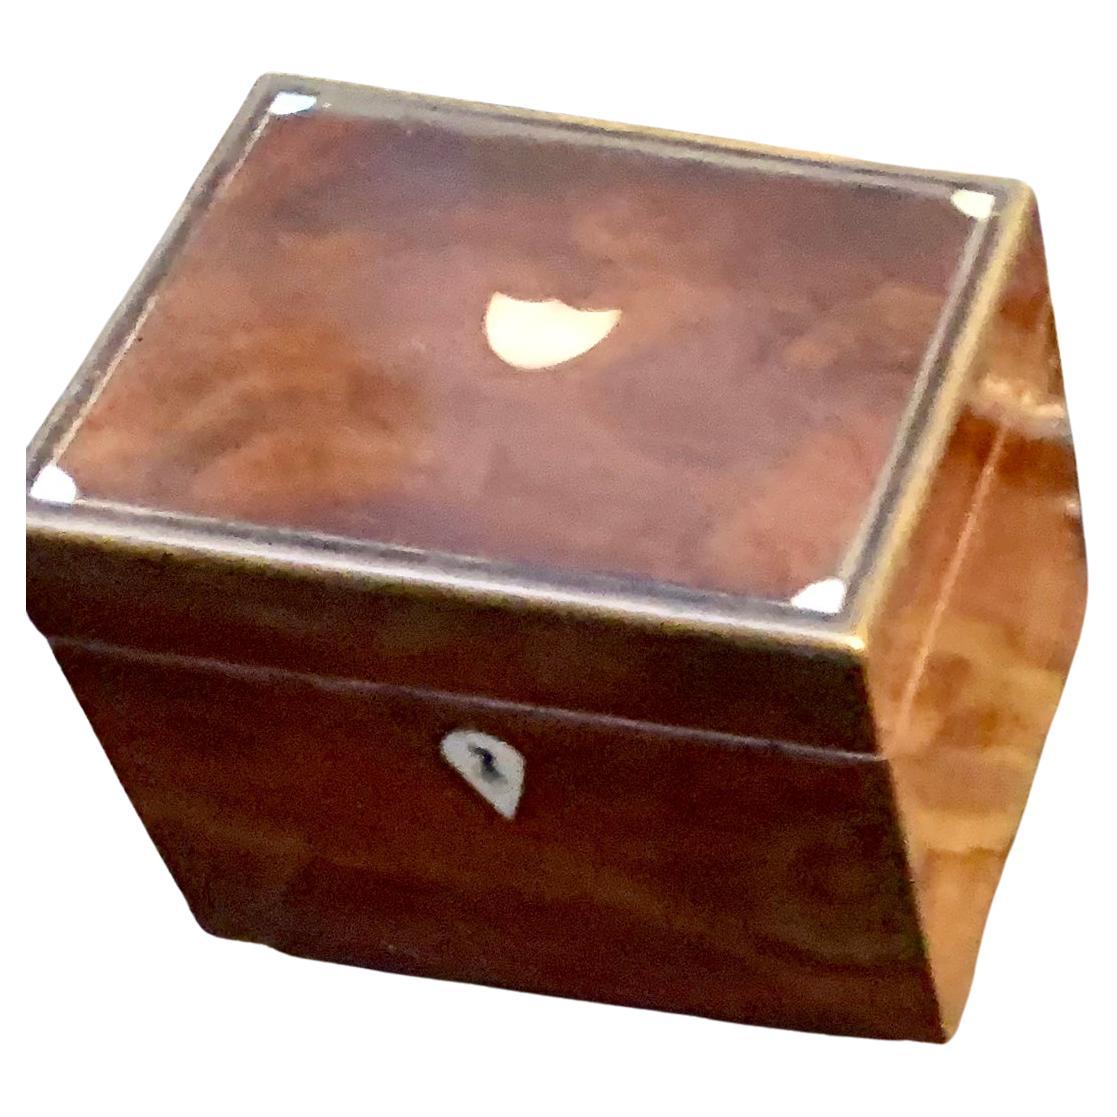 Mahogany box with inlaid mother of pearl and mirror, on small round brass feet.